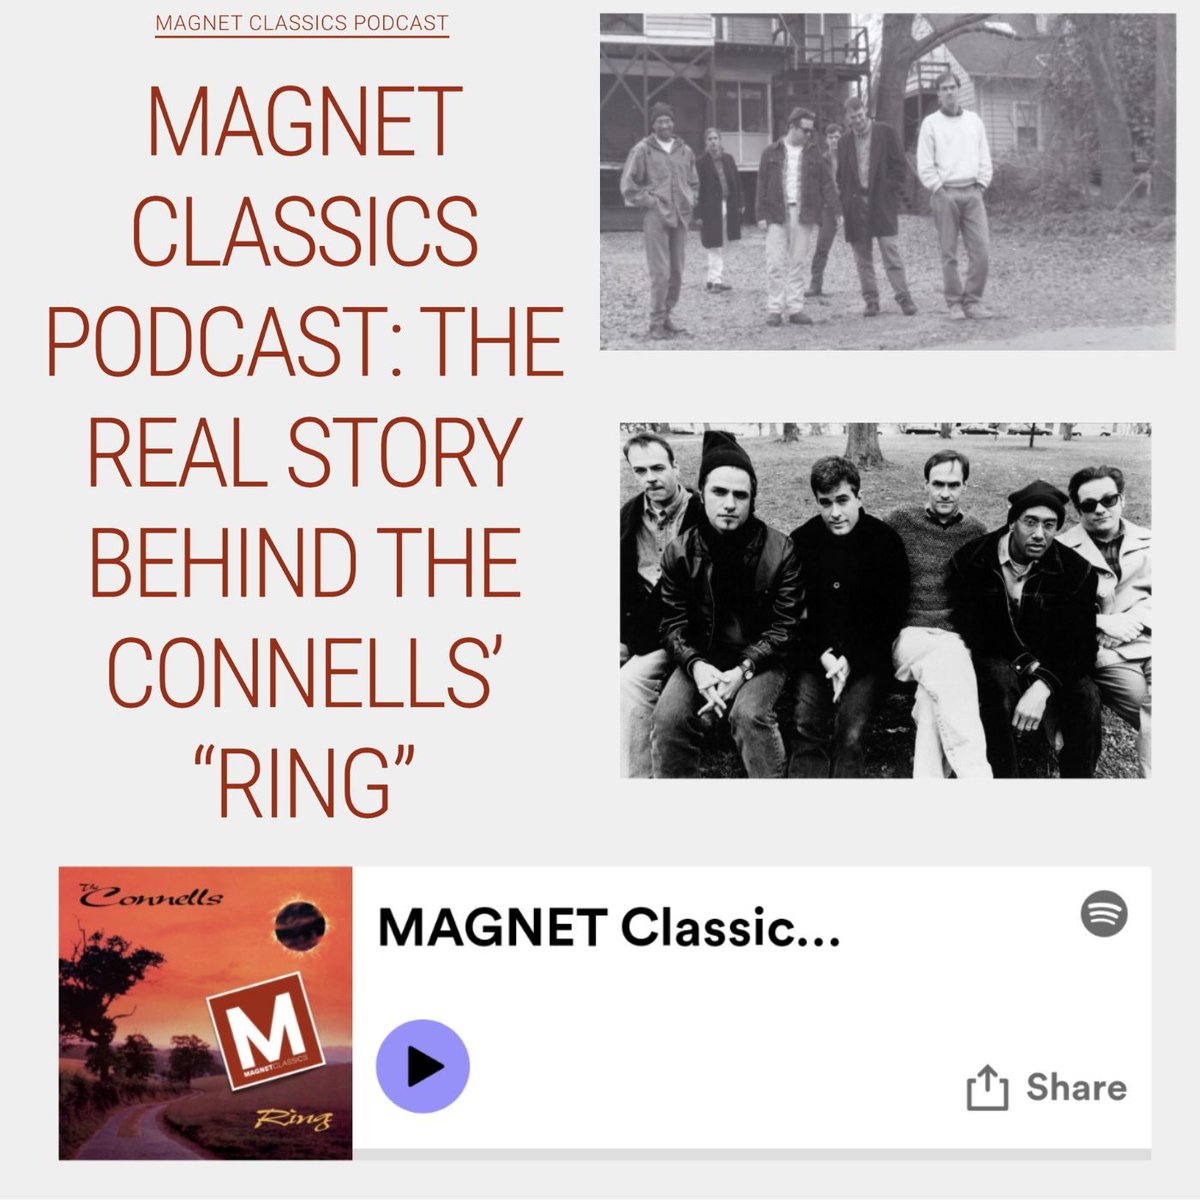 Think you know the real story of 'Ring'? Listen found.ee/vCRJpJ Join Hobart Rowland of @MAGNETMagazine as he goes off script for a candid chat with the Connells’ Doug MacMillan and Mike Connell to get the real story behind the making of 'Ring'